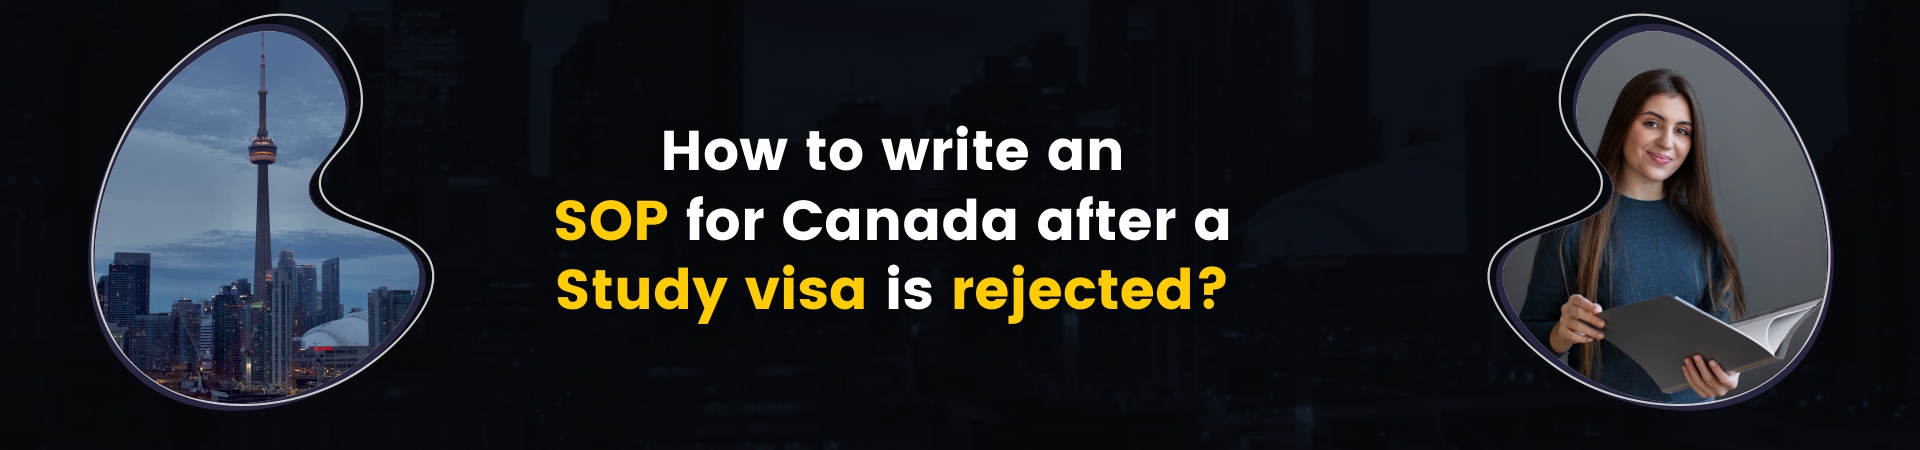 How to write an SOP for Canada after a Study visa is rejected?